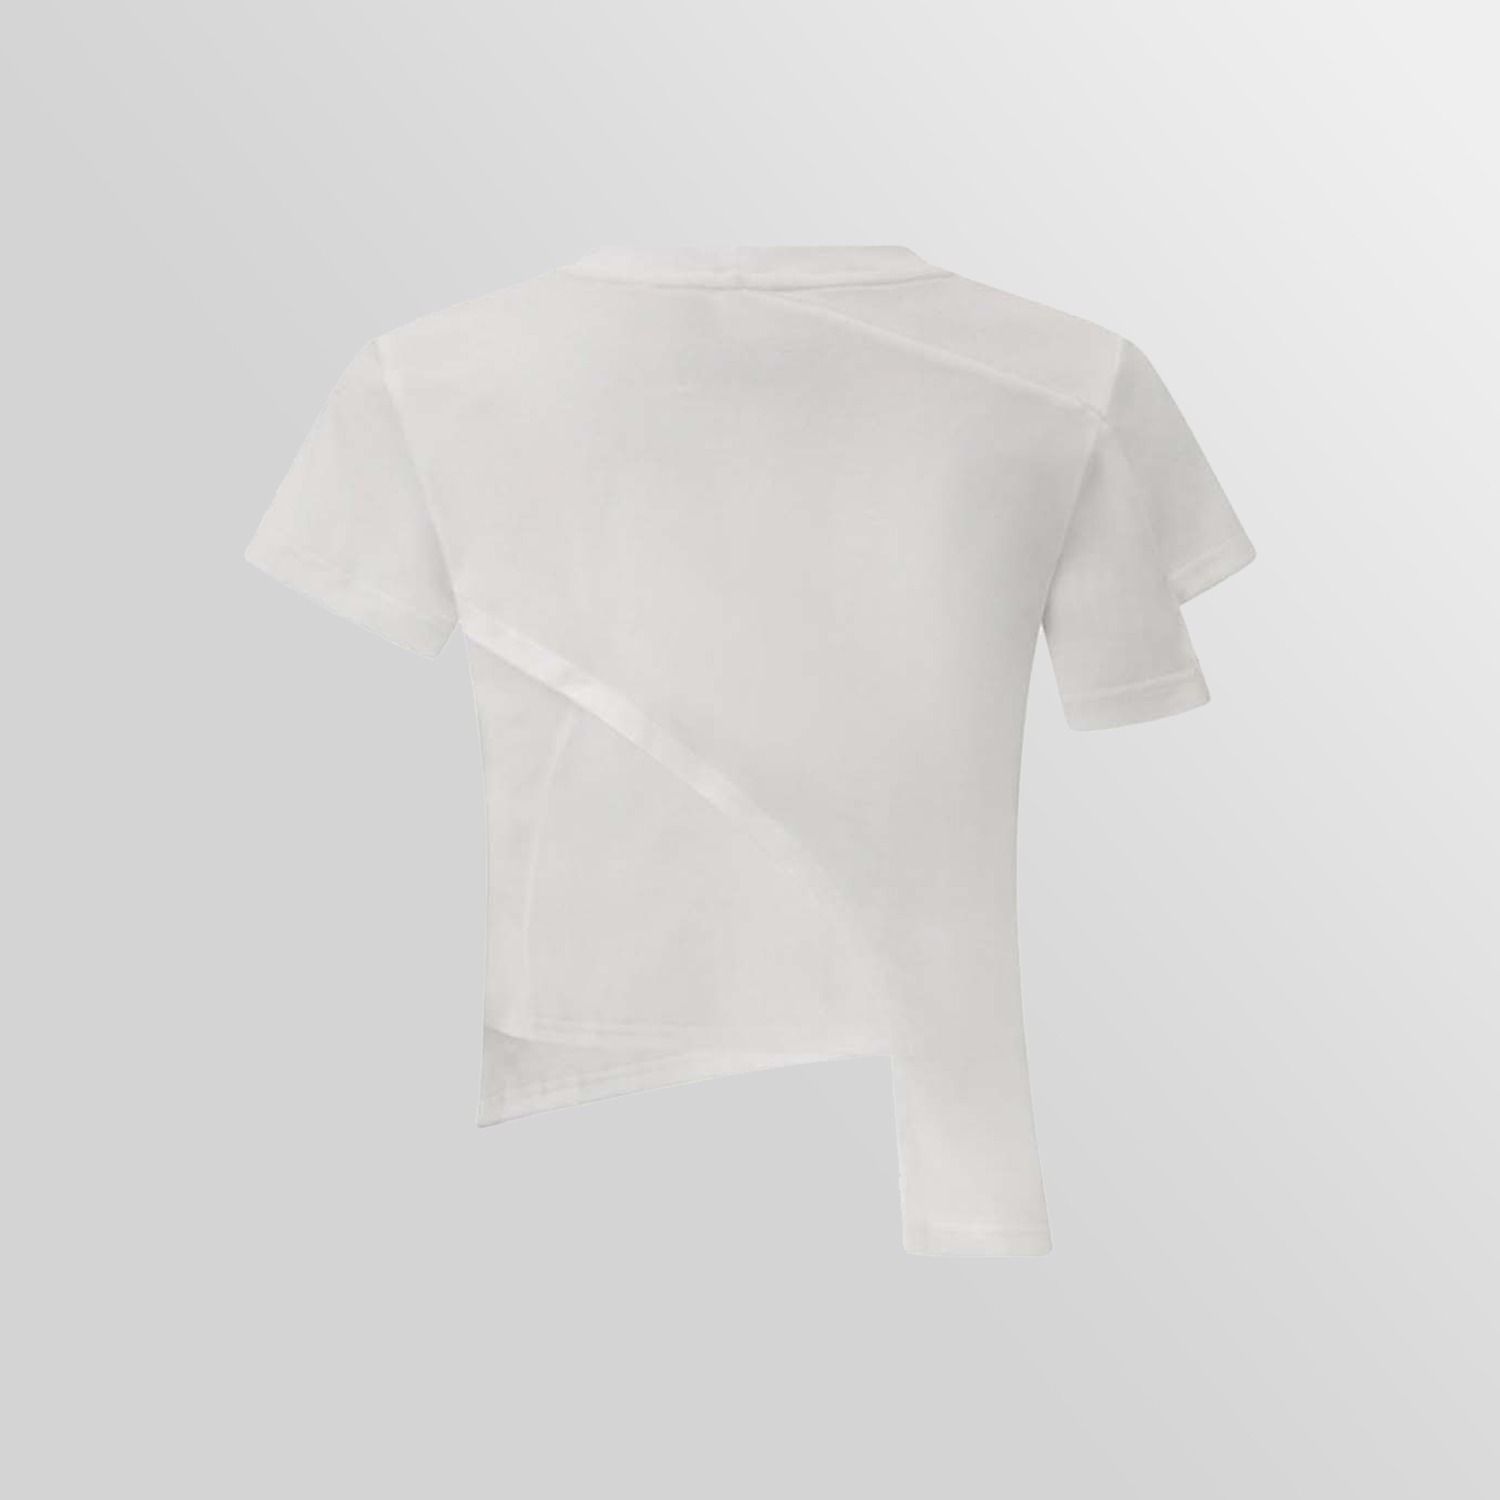 DECONSTRUCTED T-SHIRT WHITE